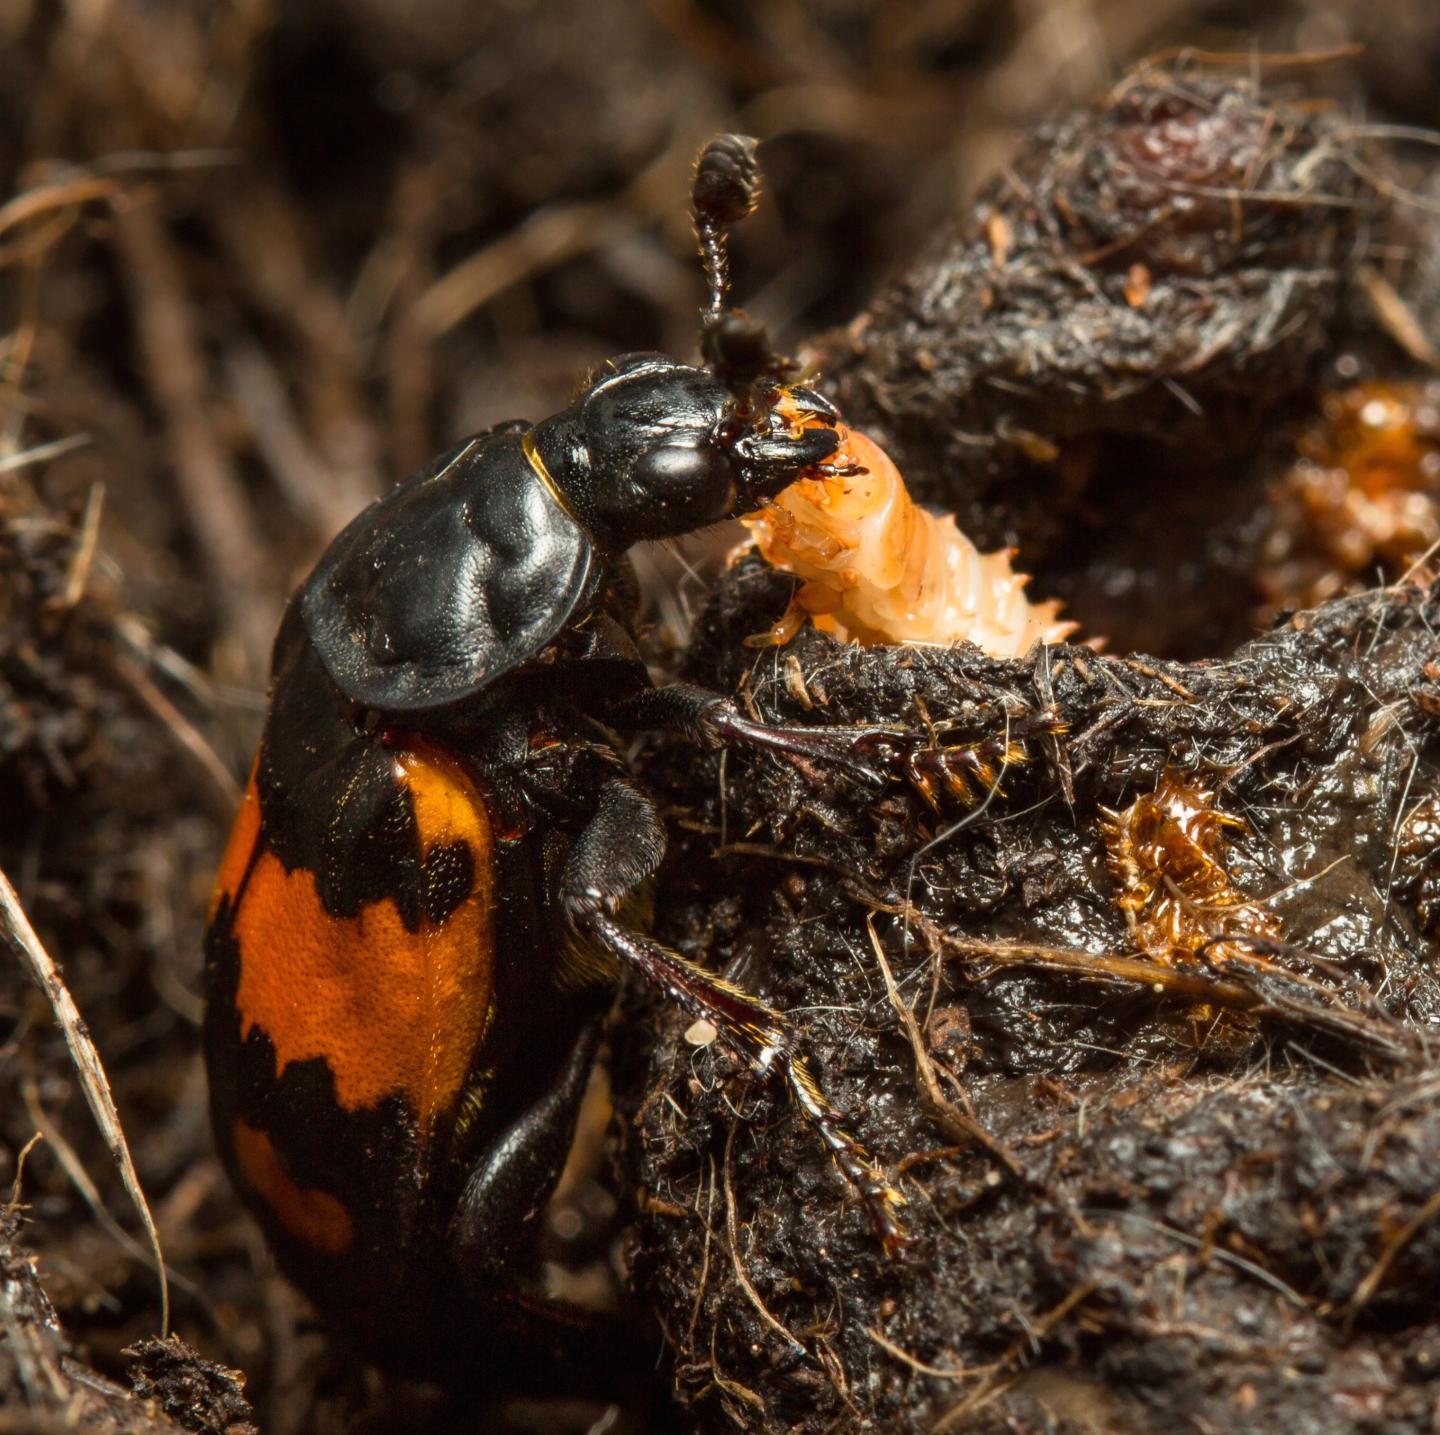 Sexton Beetle and a Larva in Its Carcass Nest